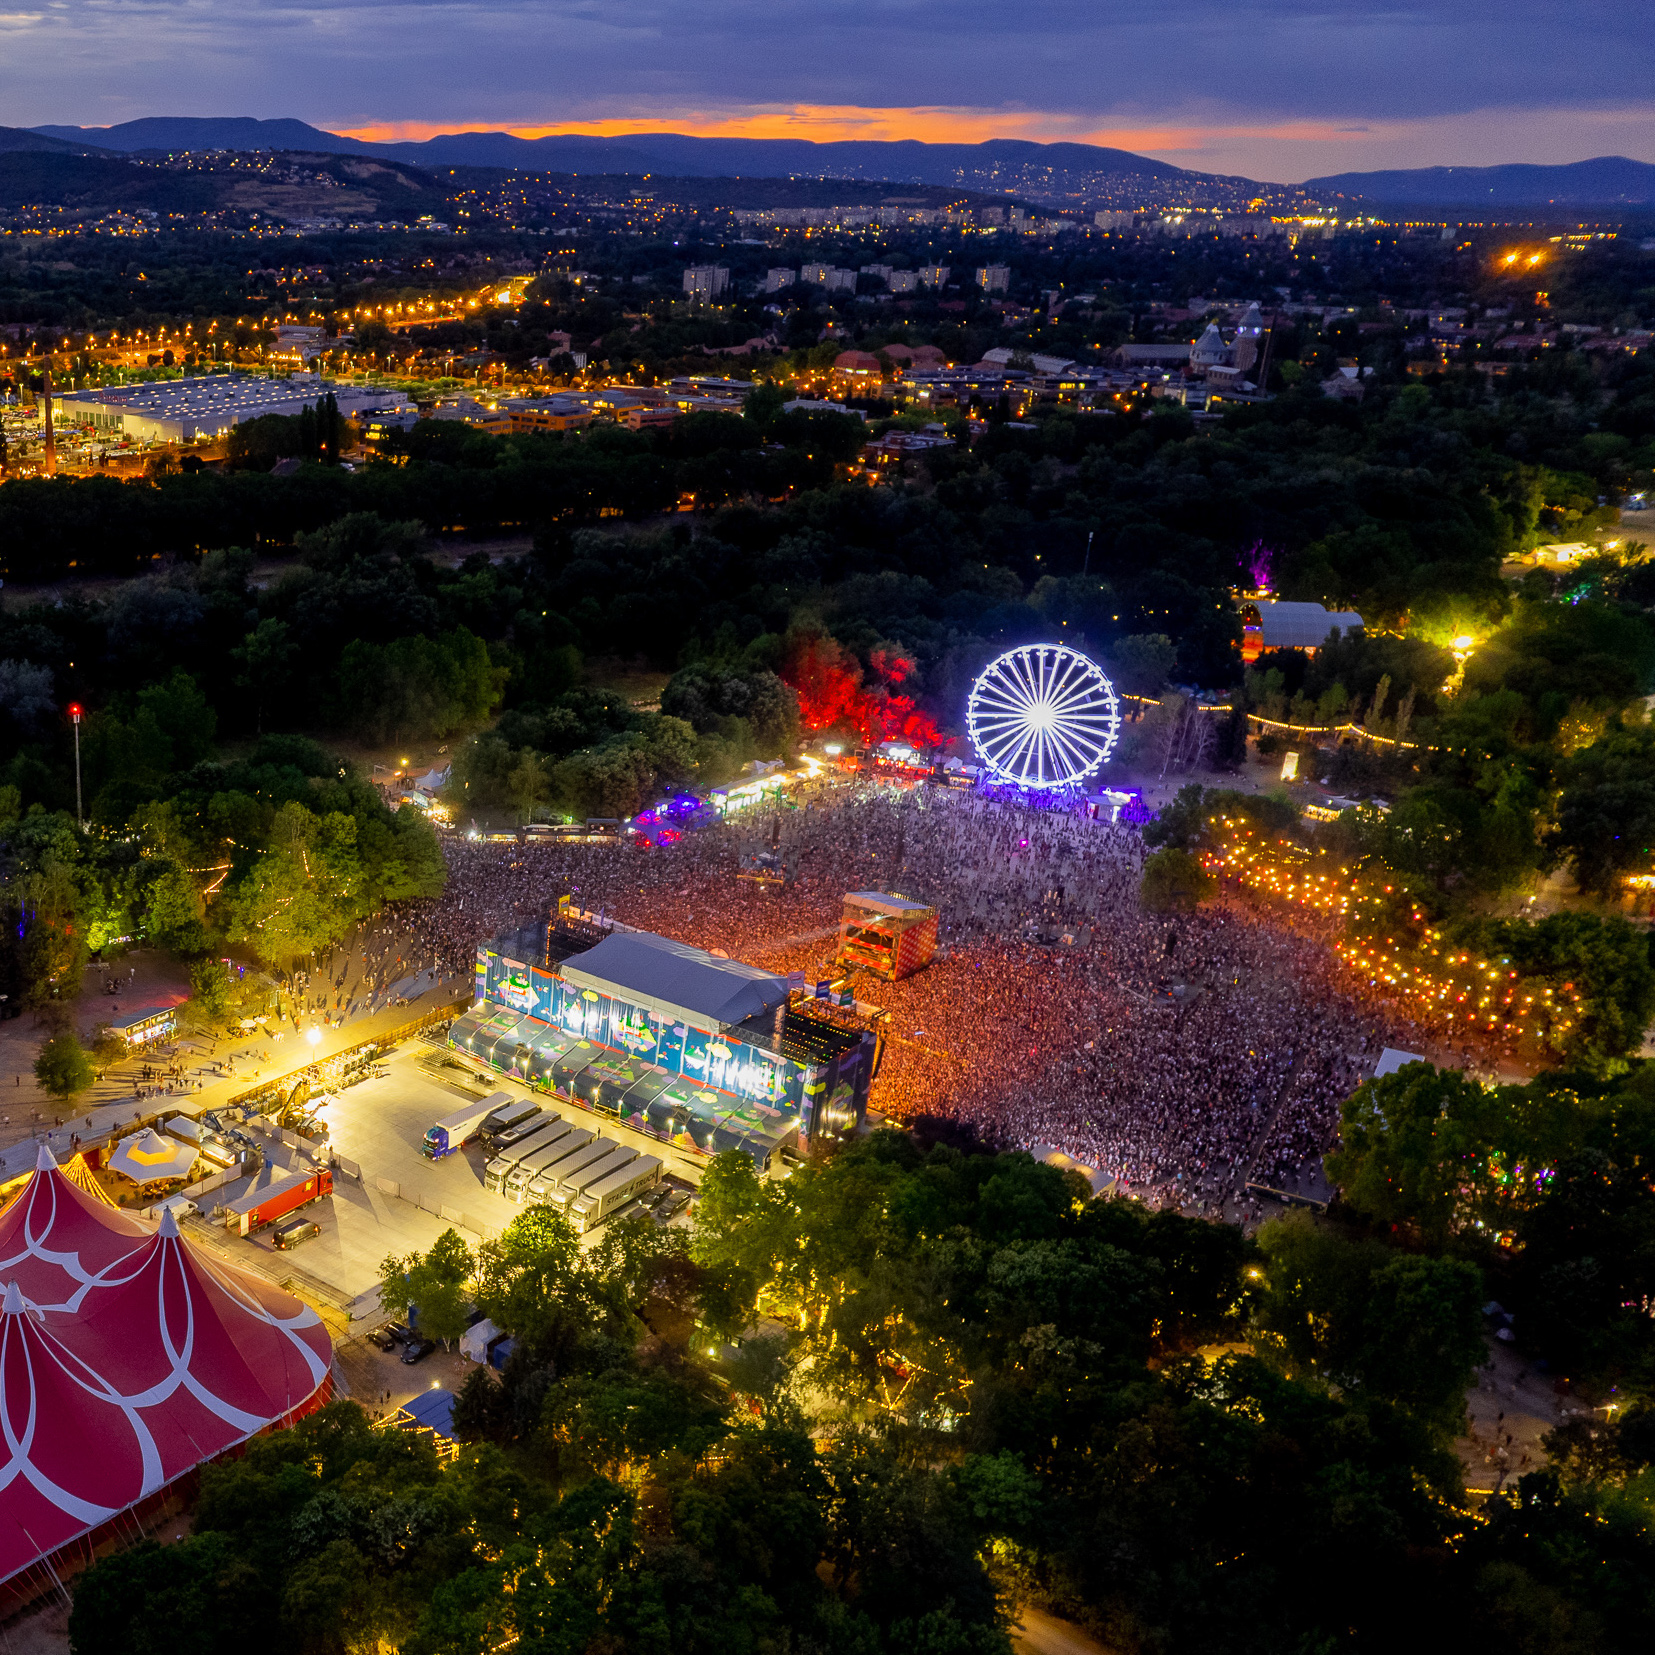 Sziget Festival’s Main Organiser Shares Insights After 'Challenging' Event